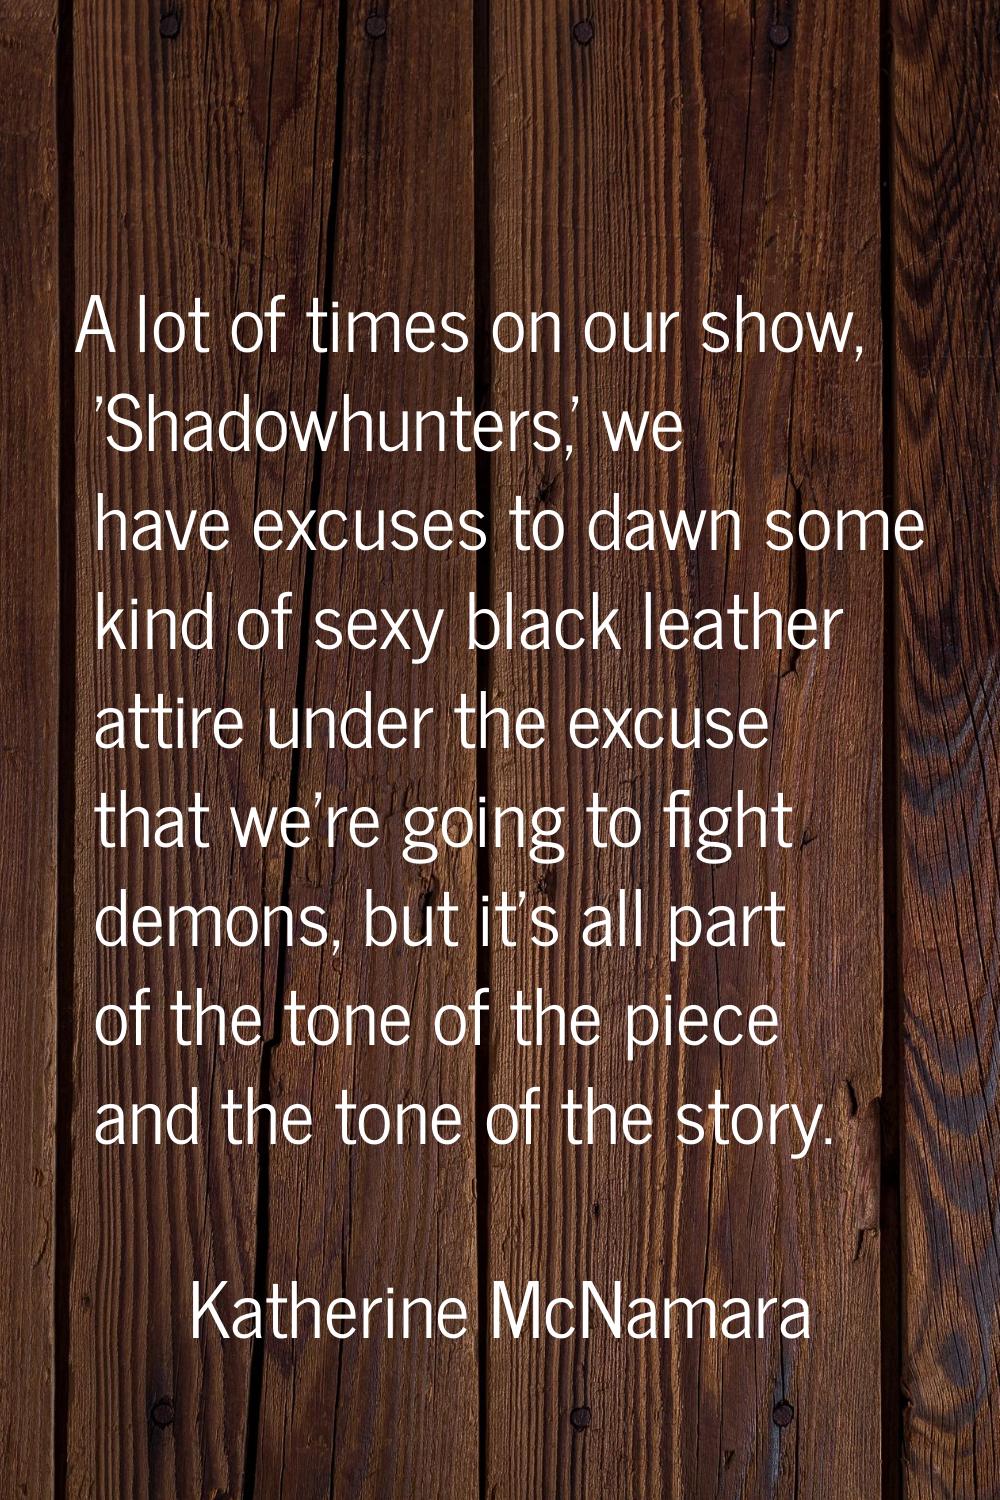 A lot of times on our show, 'Shadowhunters,' we have excuses to dawn some kind of sexy black leathe